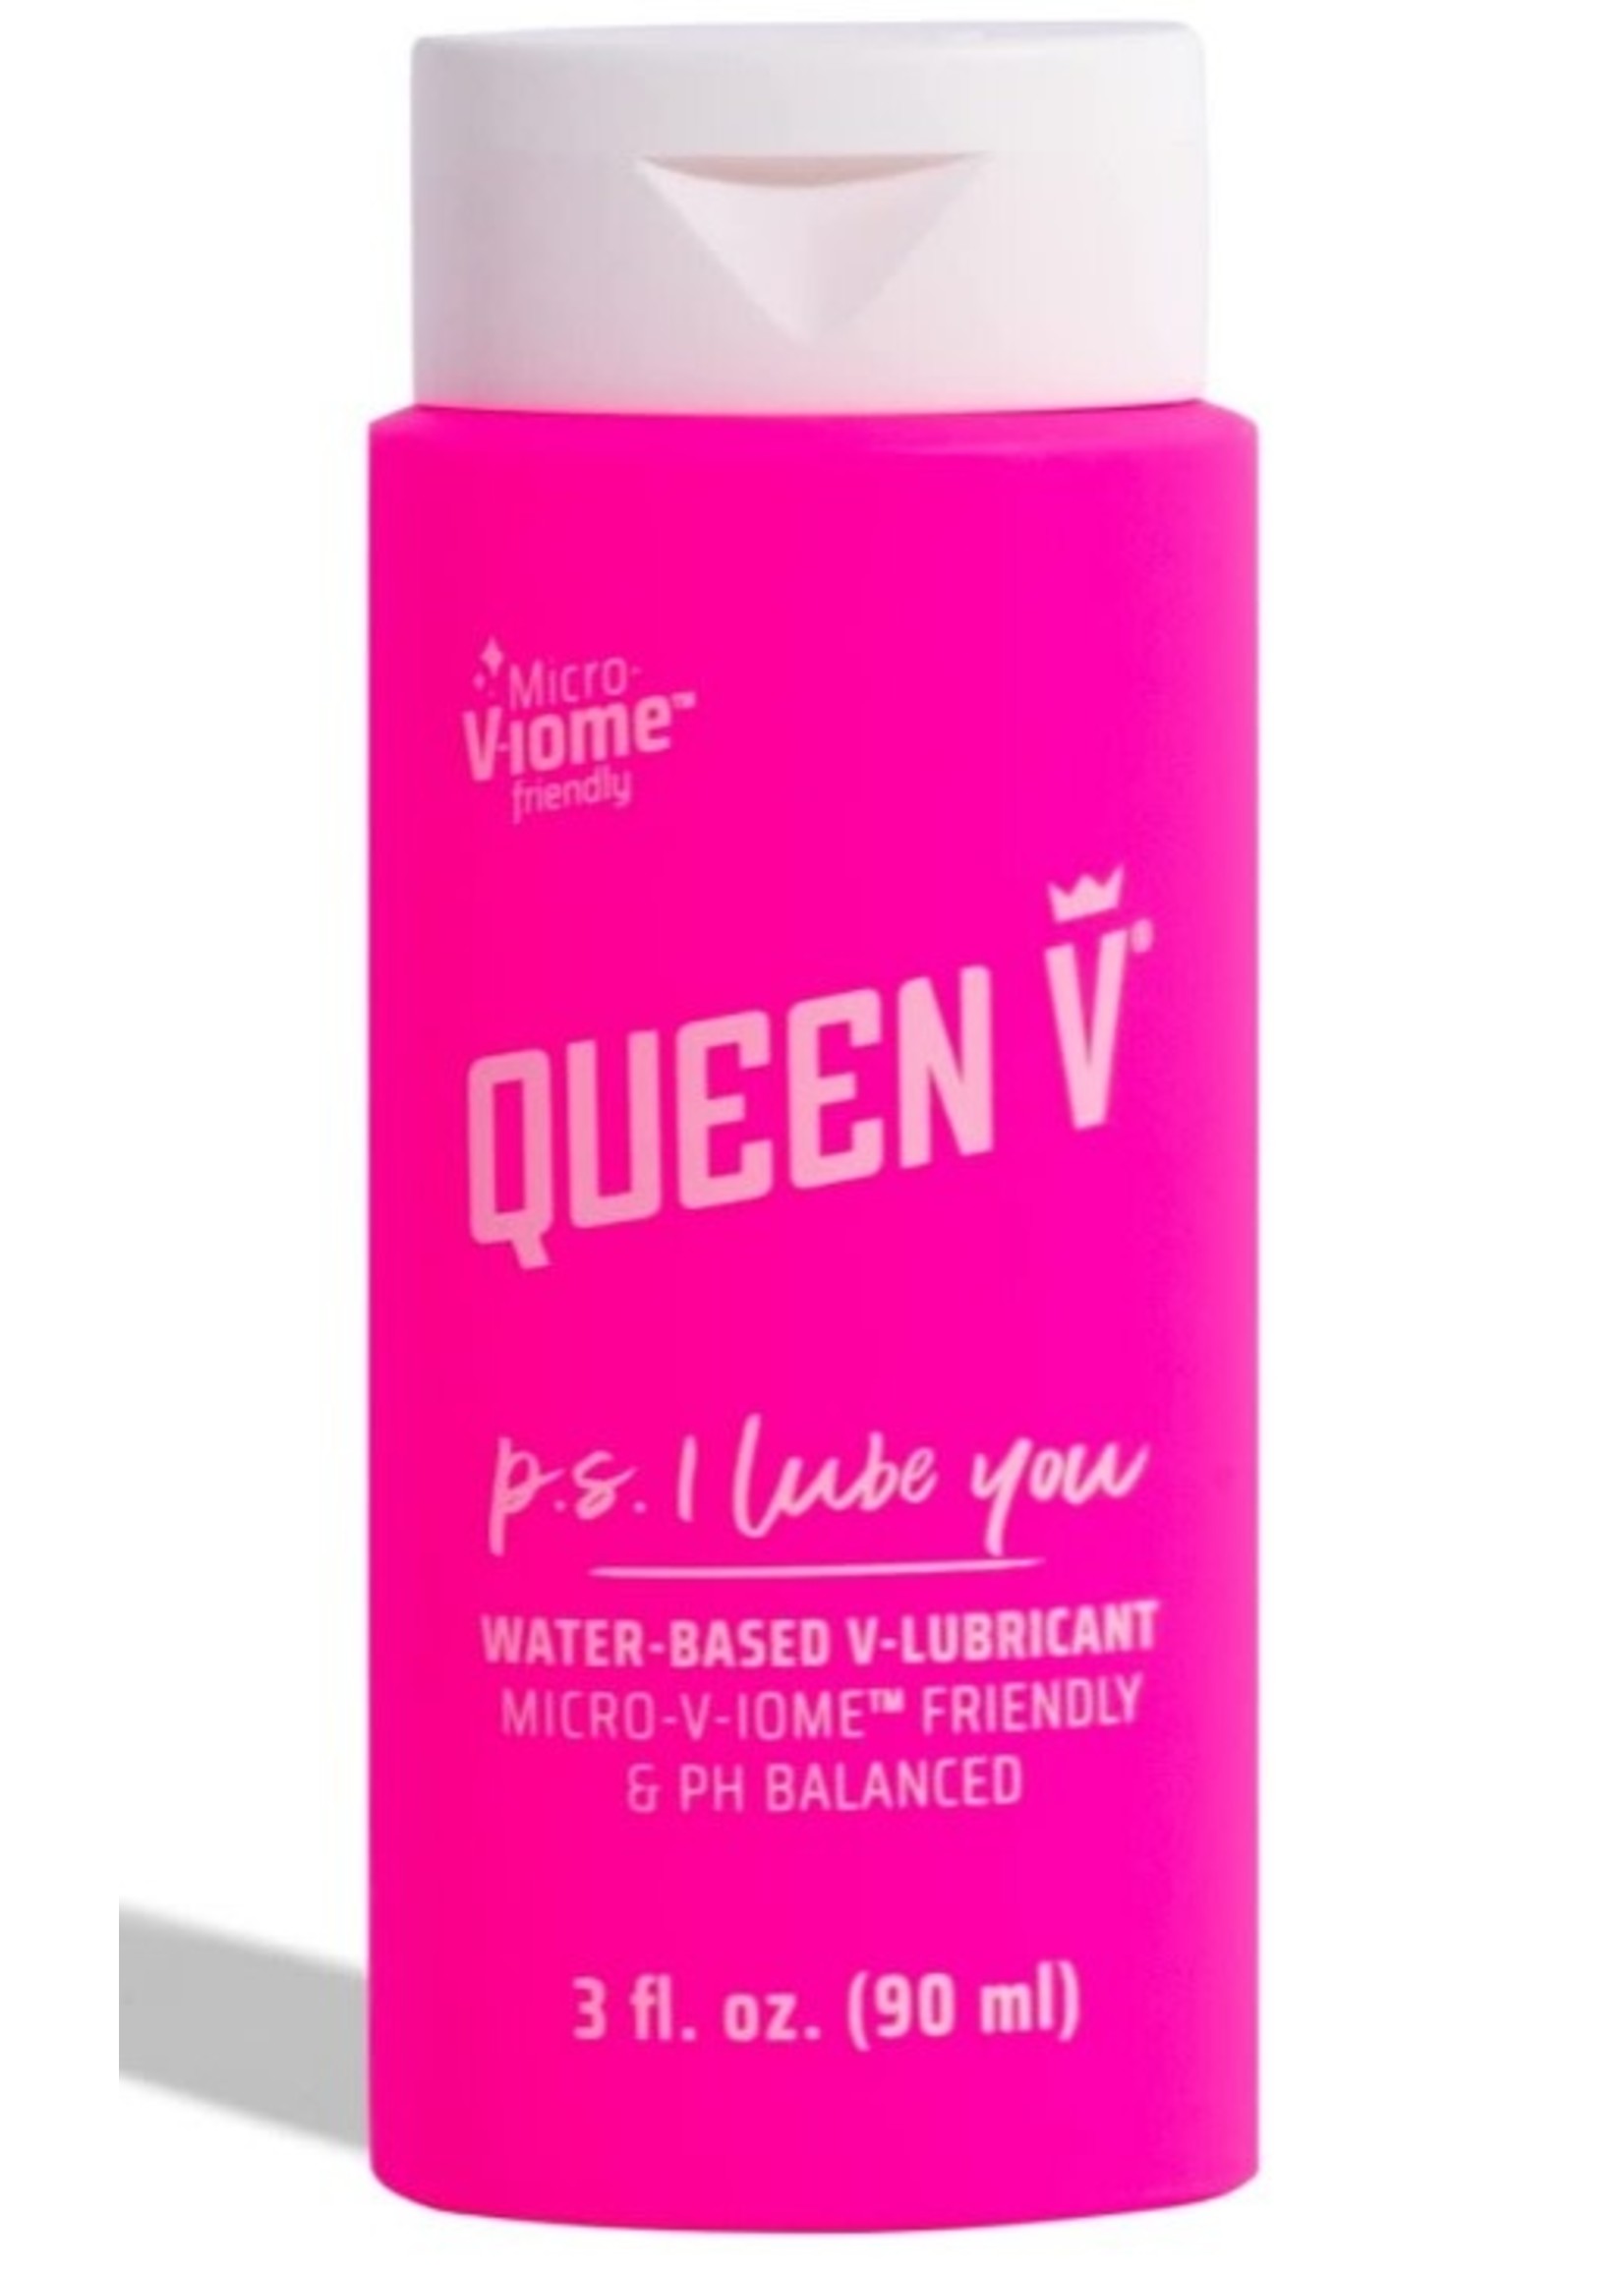 QUEEN V P.S. I Lube You - Intimate Water-Based Lube 3 oz